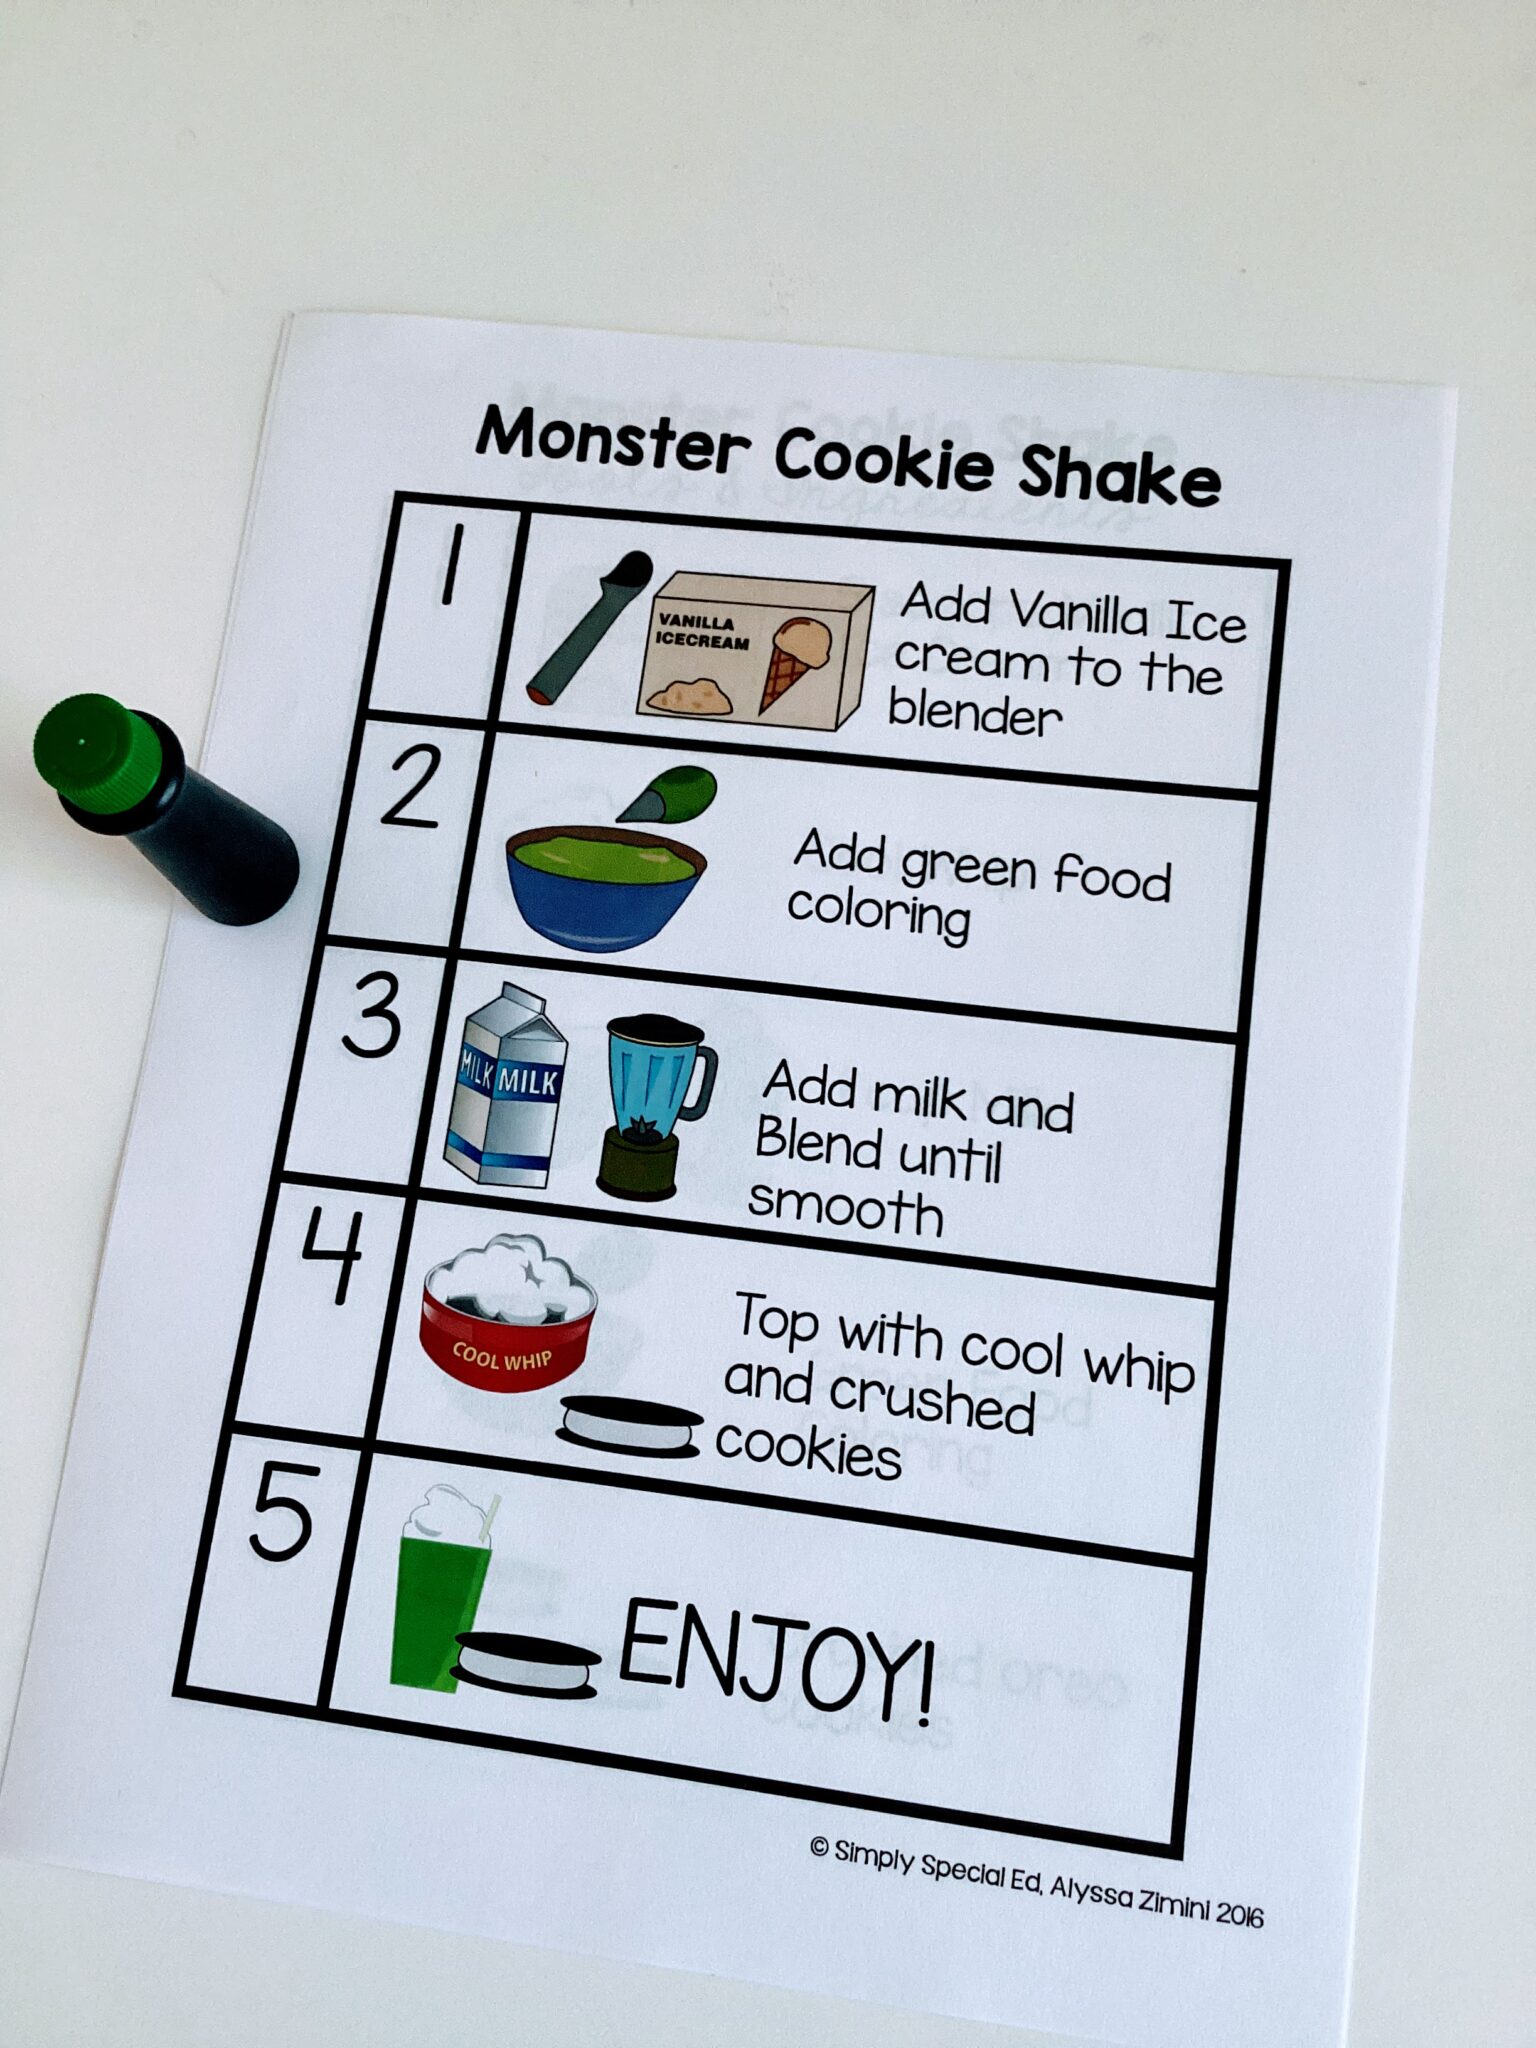 the monster cookie shake recipe with a food coloring dropper next to it